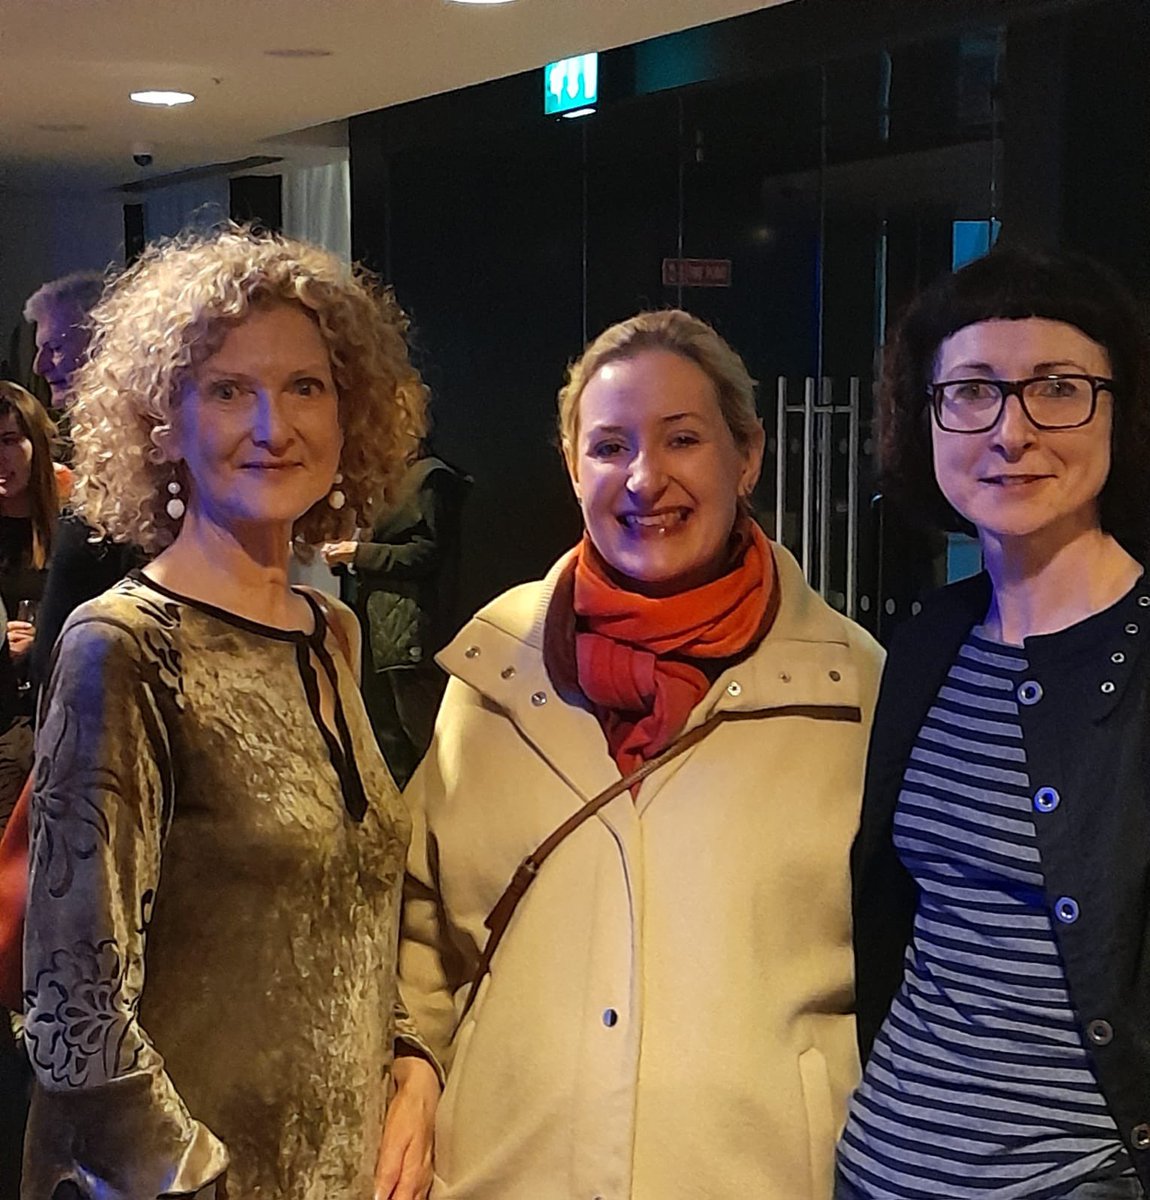 Great @WomenOnAirIE event tonight with the legendary Justine McCarthy. Chuffed to meet someone whose journalism I’ve admired for years & who has done such important work exposing & reporting on social issues 👏👏 Thanks to @FionaJoburg for having the wherewithal to nab a pic 📸